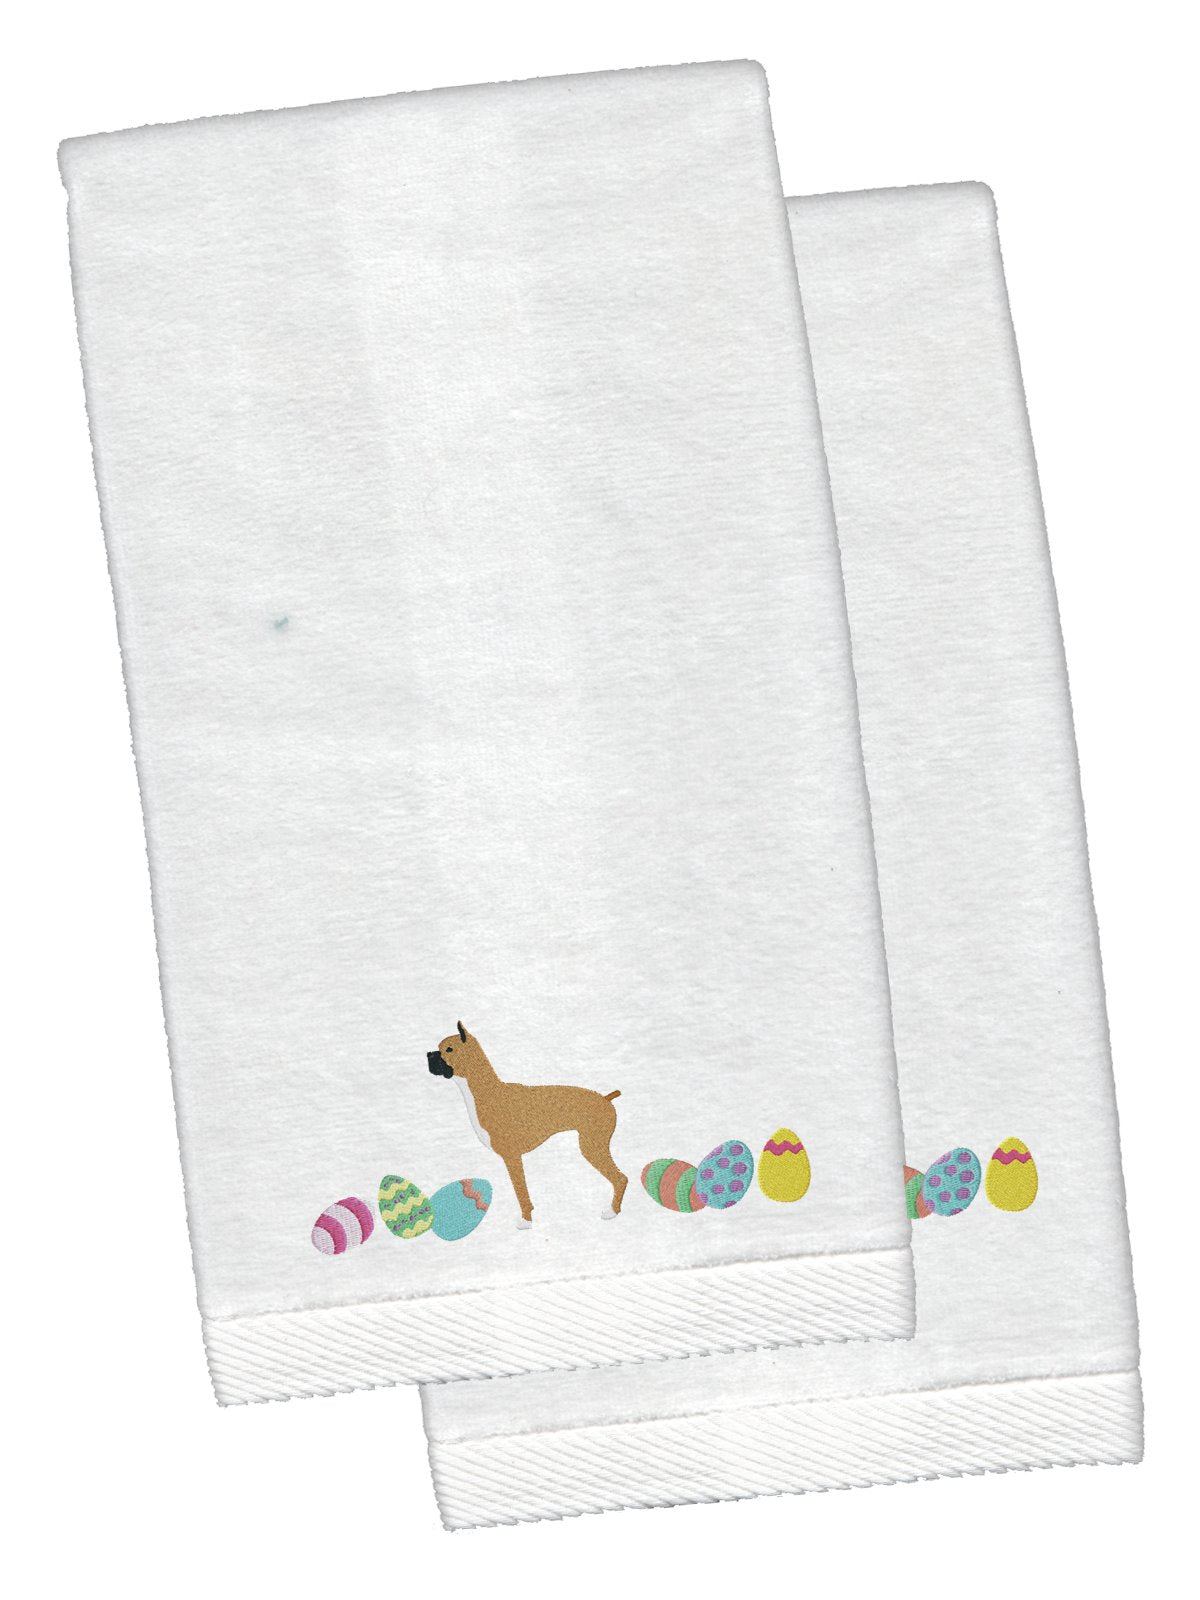 Boxer Easter White Embroidered Plush Hand Towel Set of 2 CK1615KTEMB by Caroline's Treasures